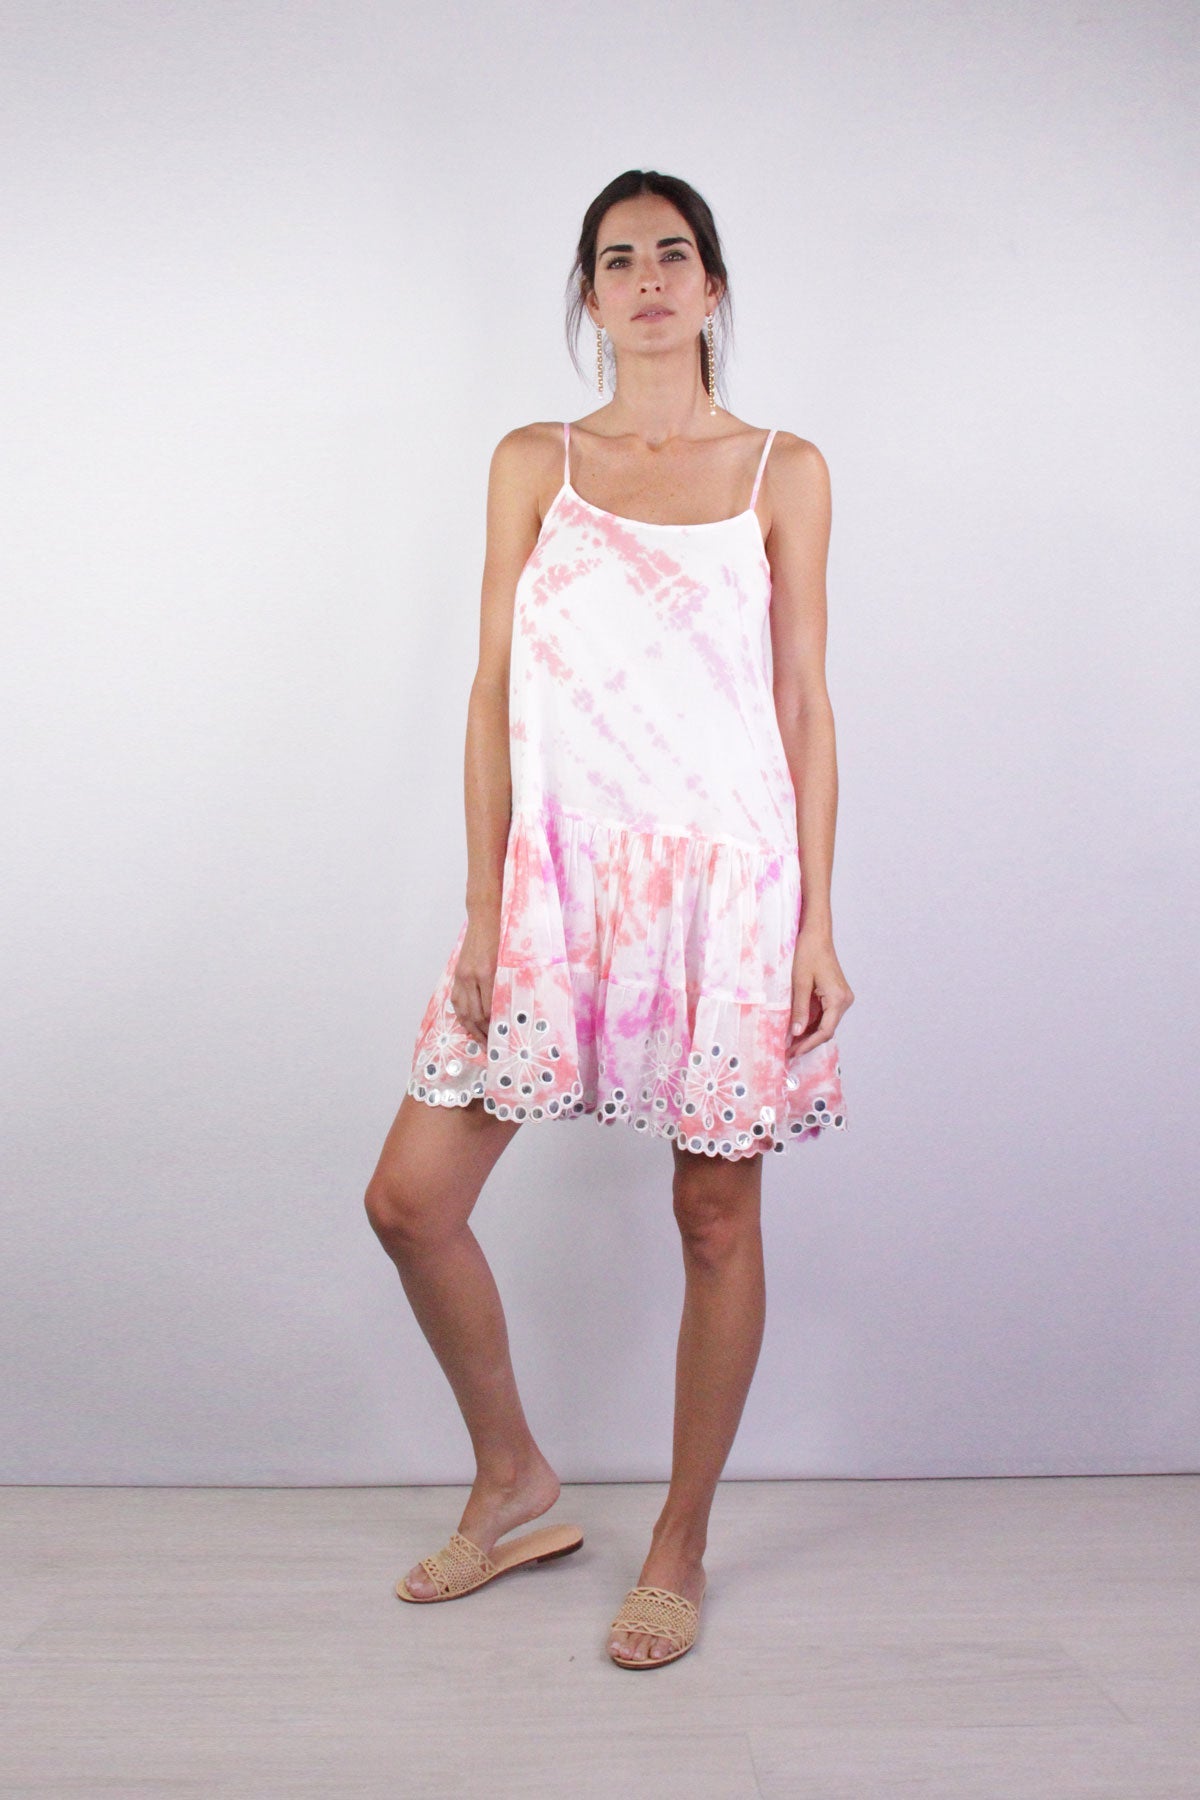 Spiral Tye Dye Strappy Dress with Mirror in Coral Pink - shop-olivia.com